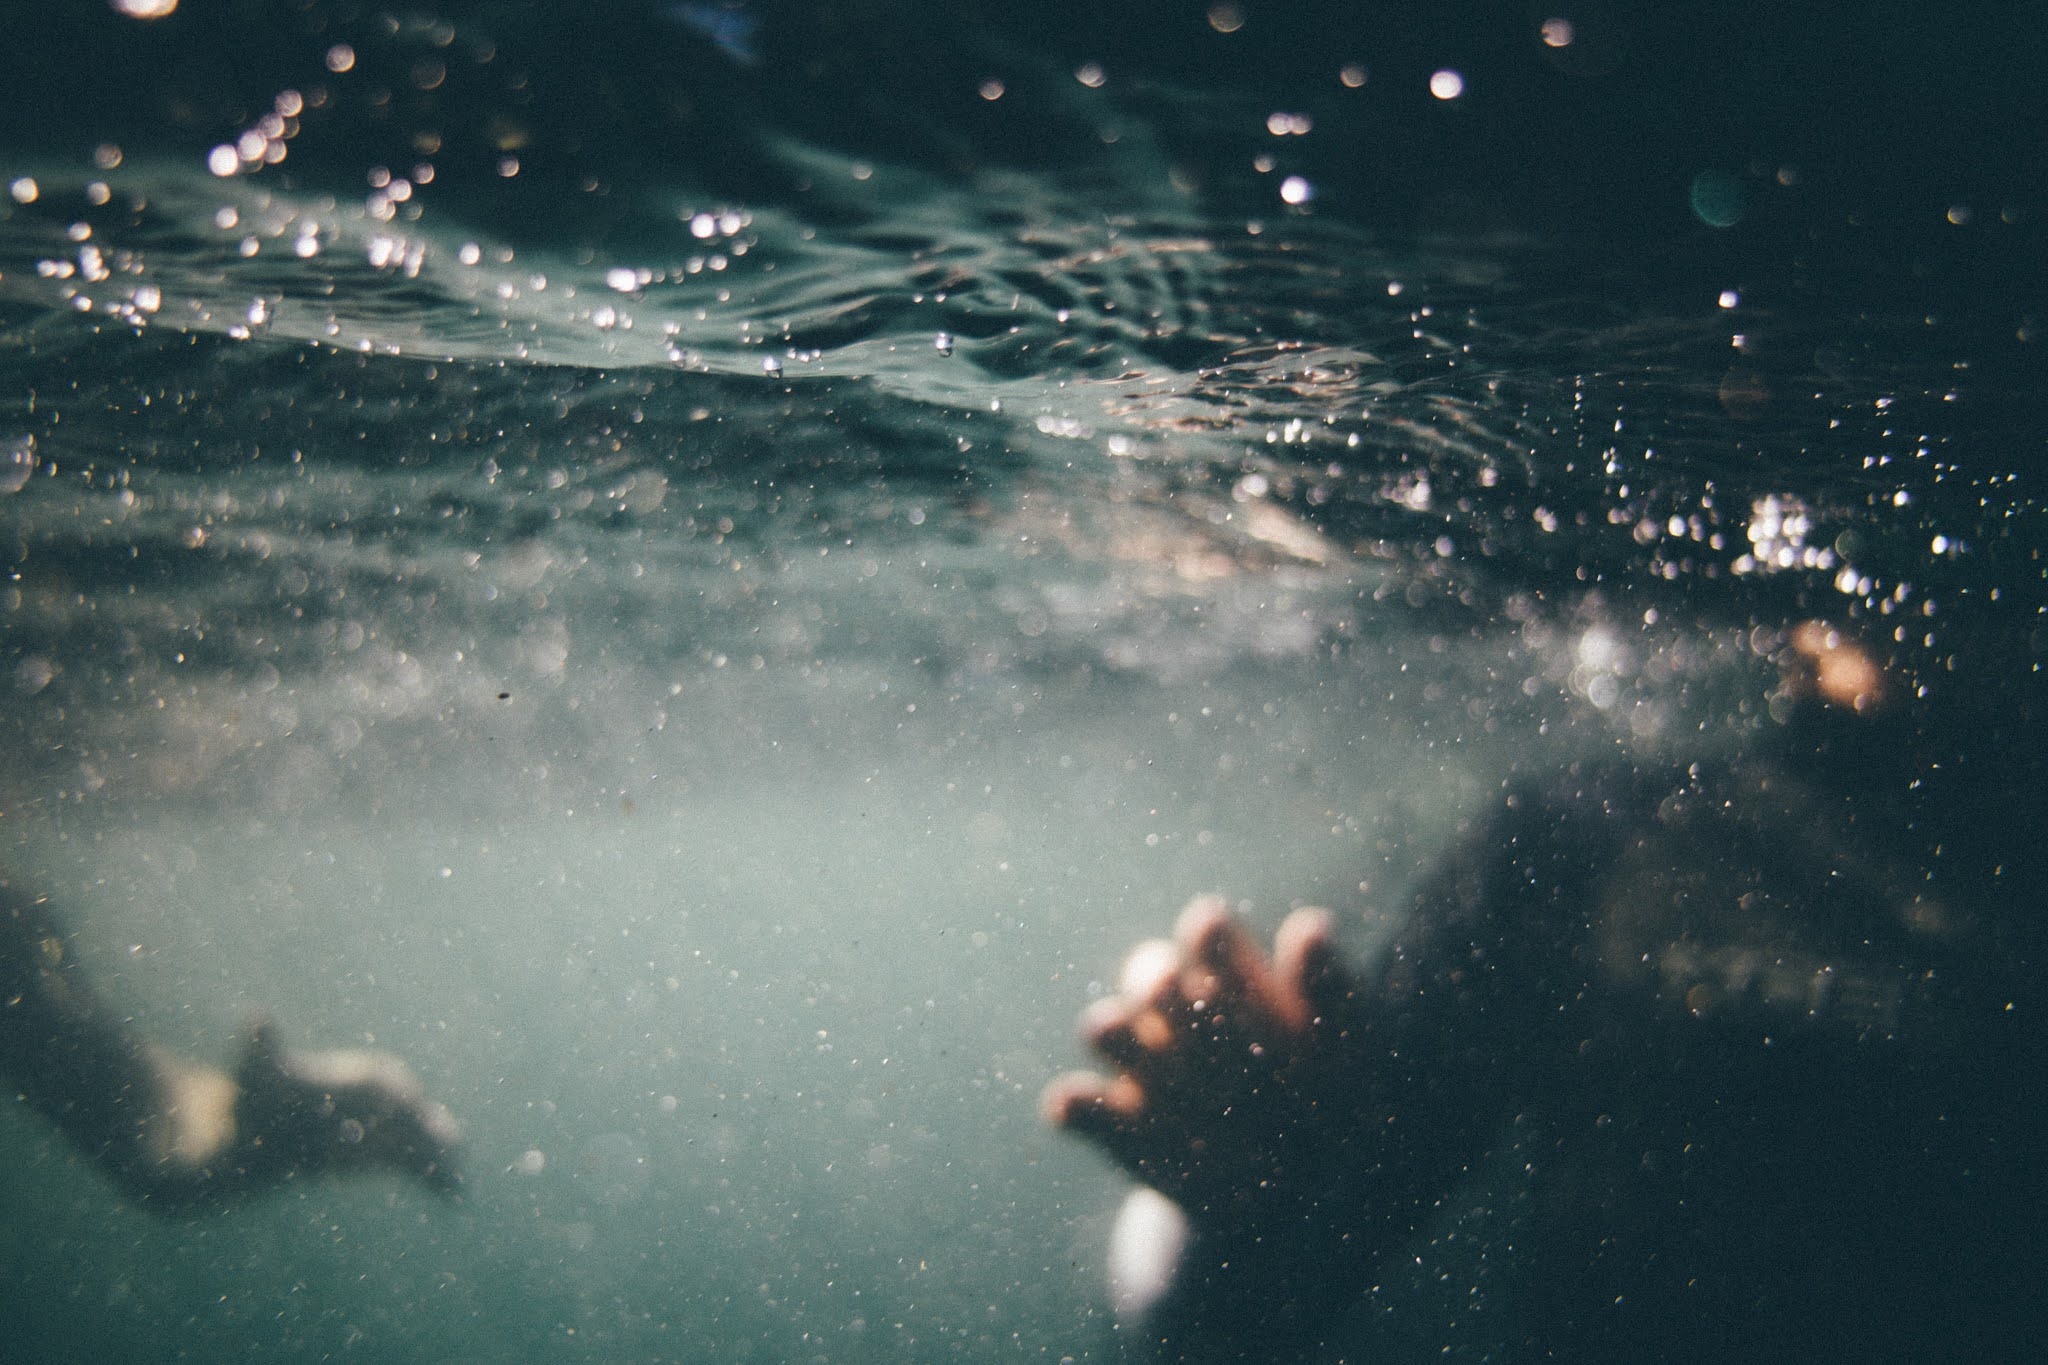 Underwater. Make sure you don't 'dip out' on swimming safety. Picture credit: Pixabay. 